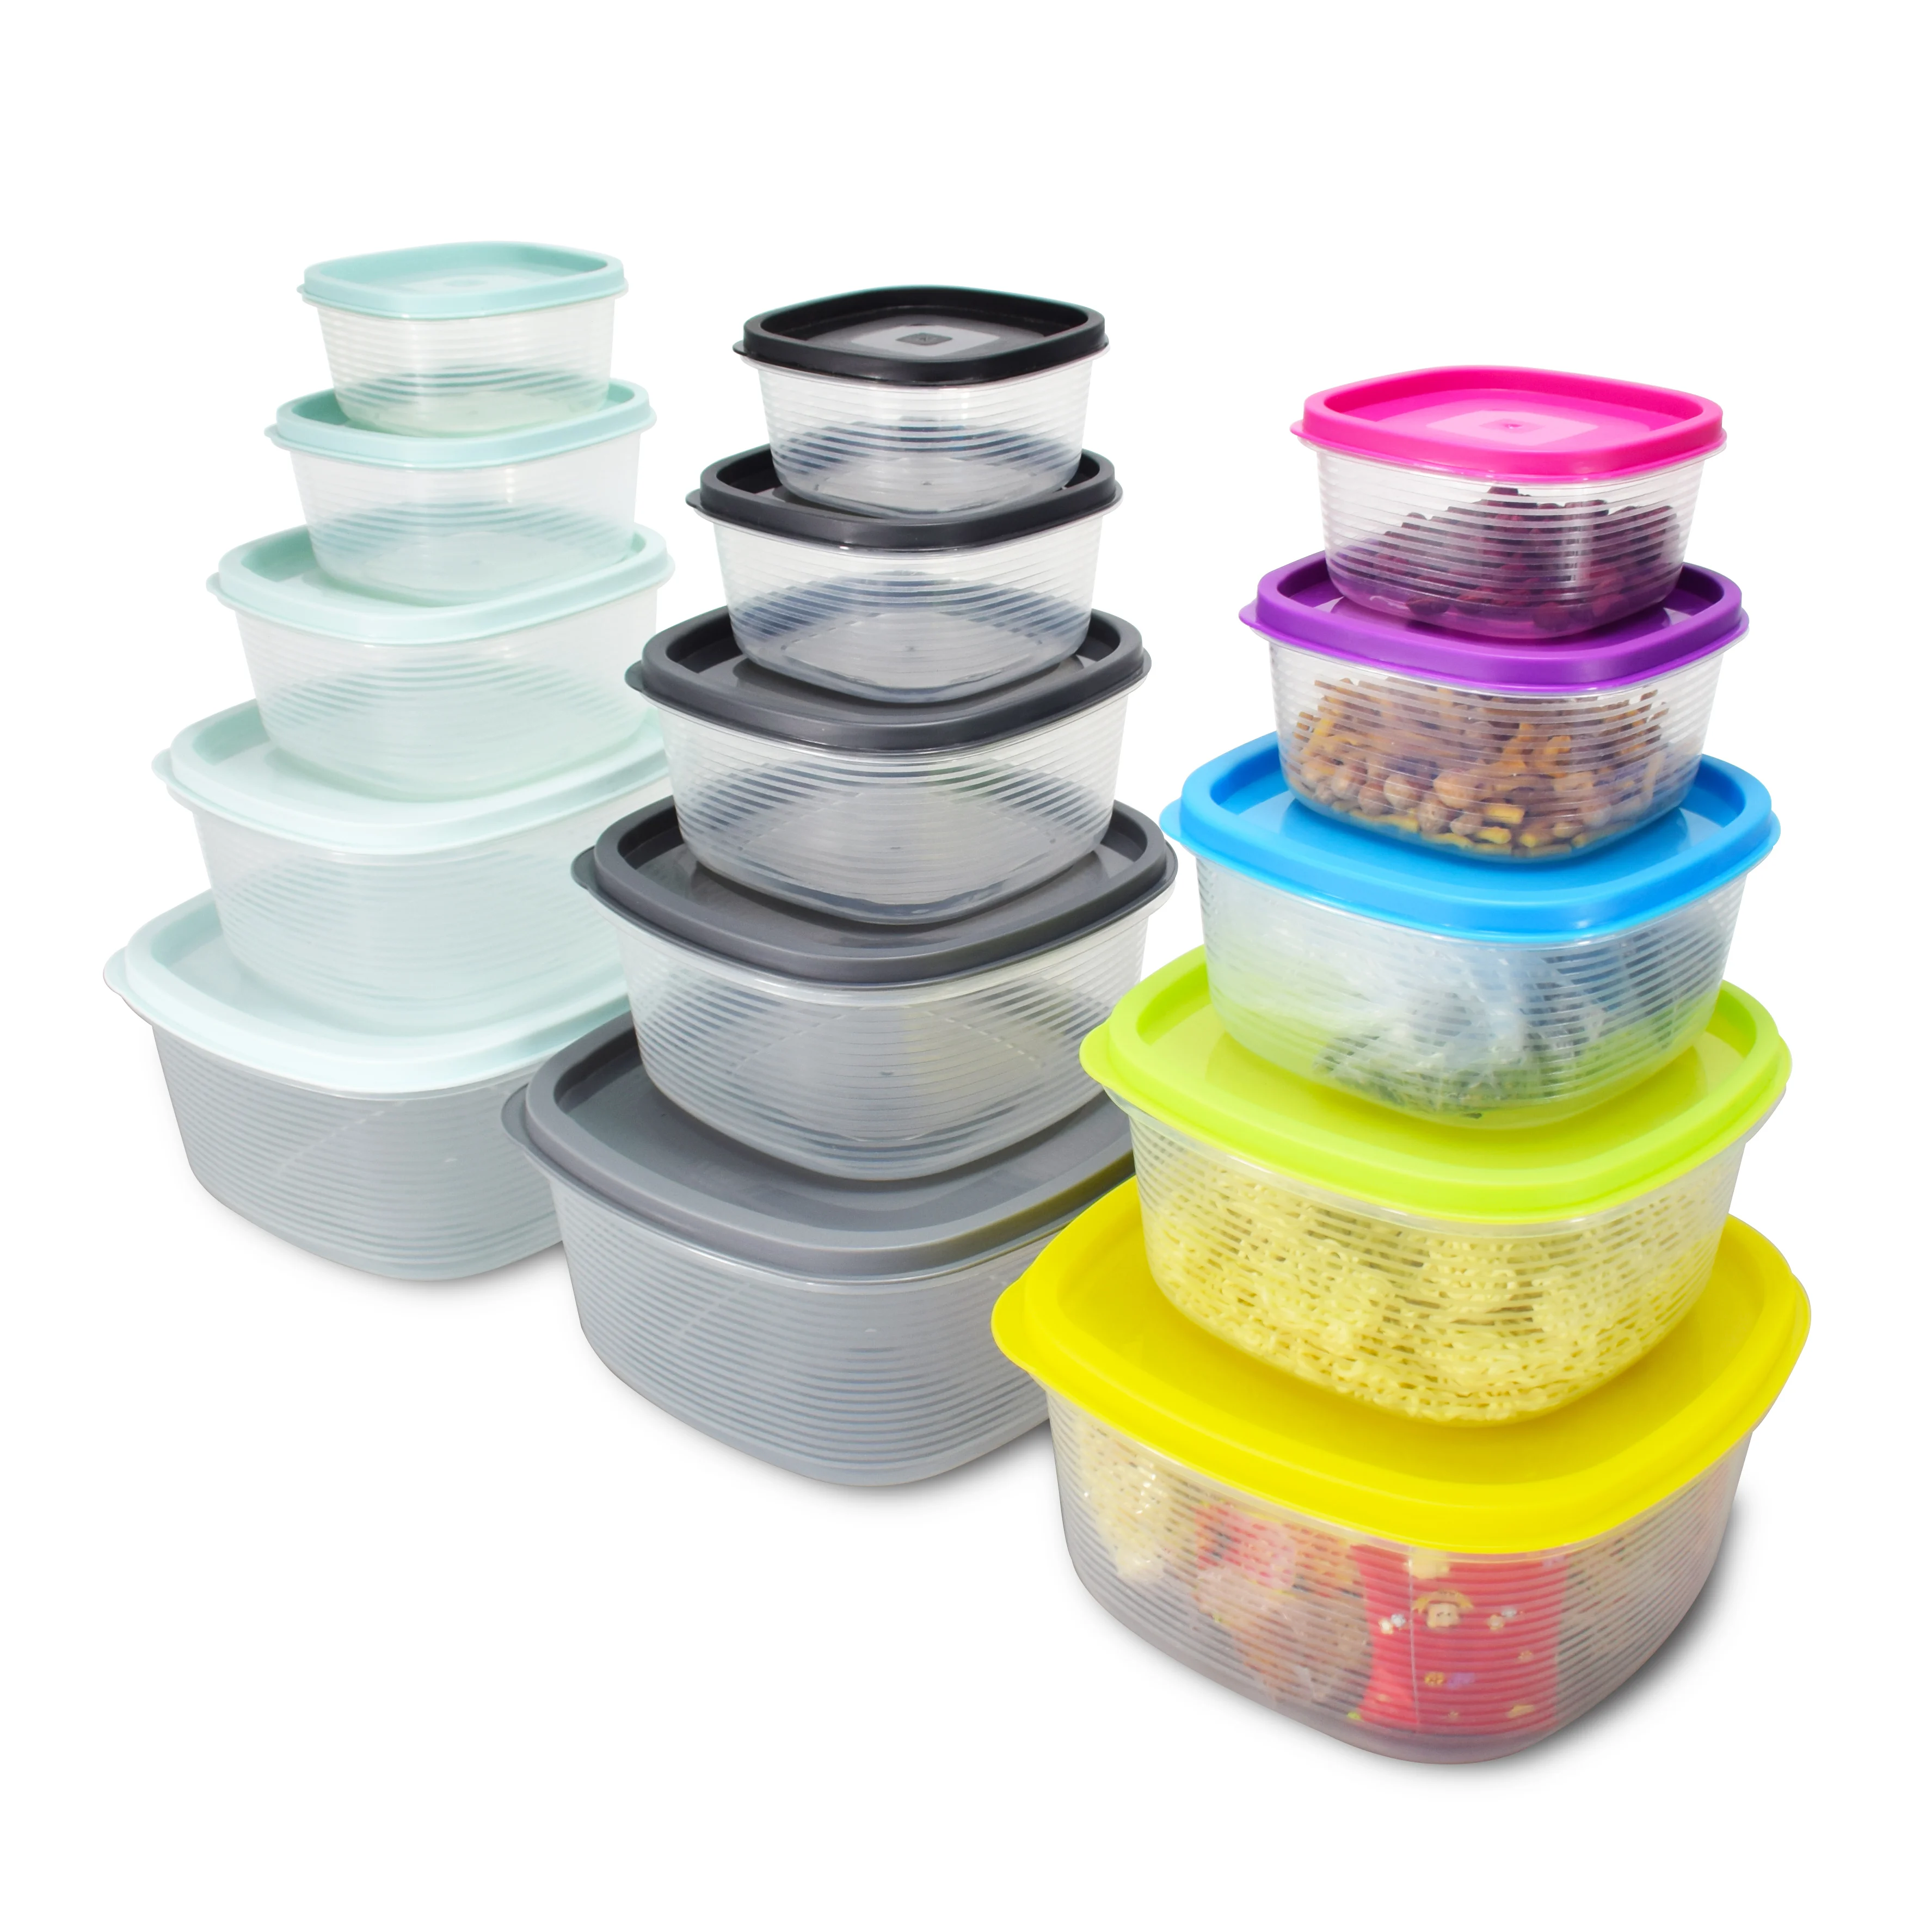 

Wholesale cheap 5 pcs square reusable transparent bpa free plastic pp airtight kitchen dry food storage container box with lid, Black/green/colorful/custom color